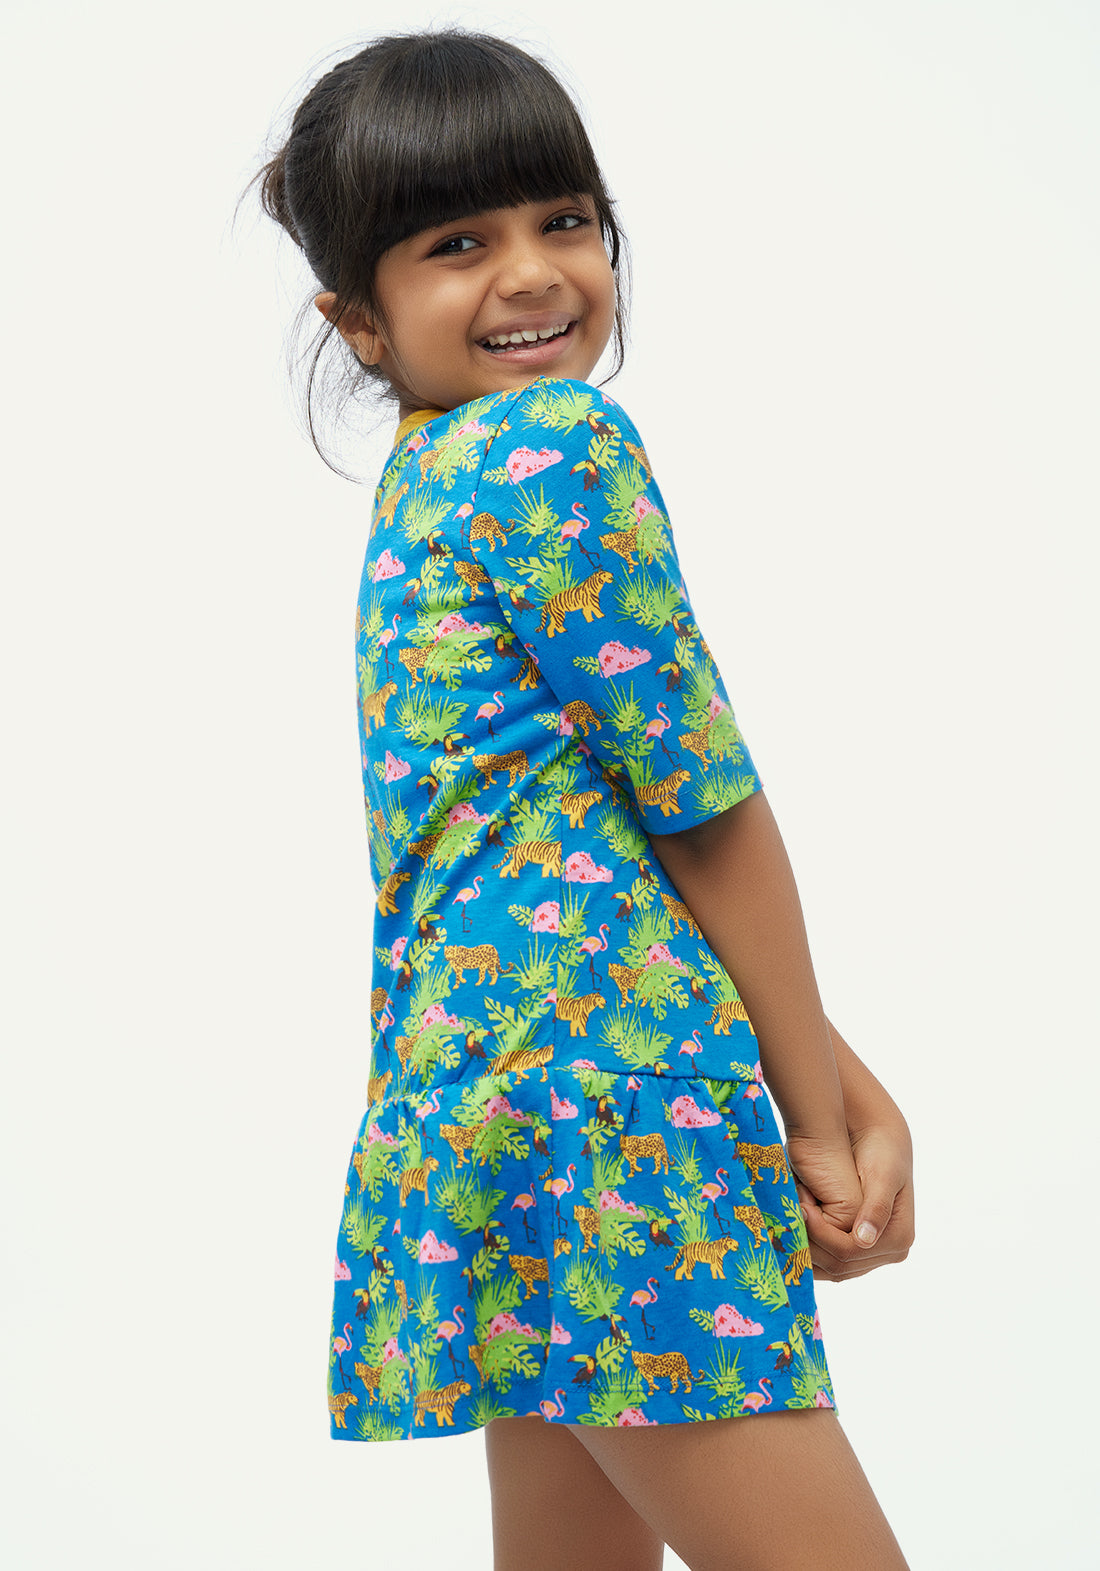 BLUE, YELLOW AND GREEN SAFARI PRINT FIT AND FLARED DRESS